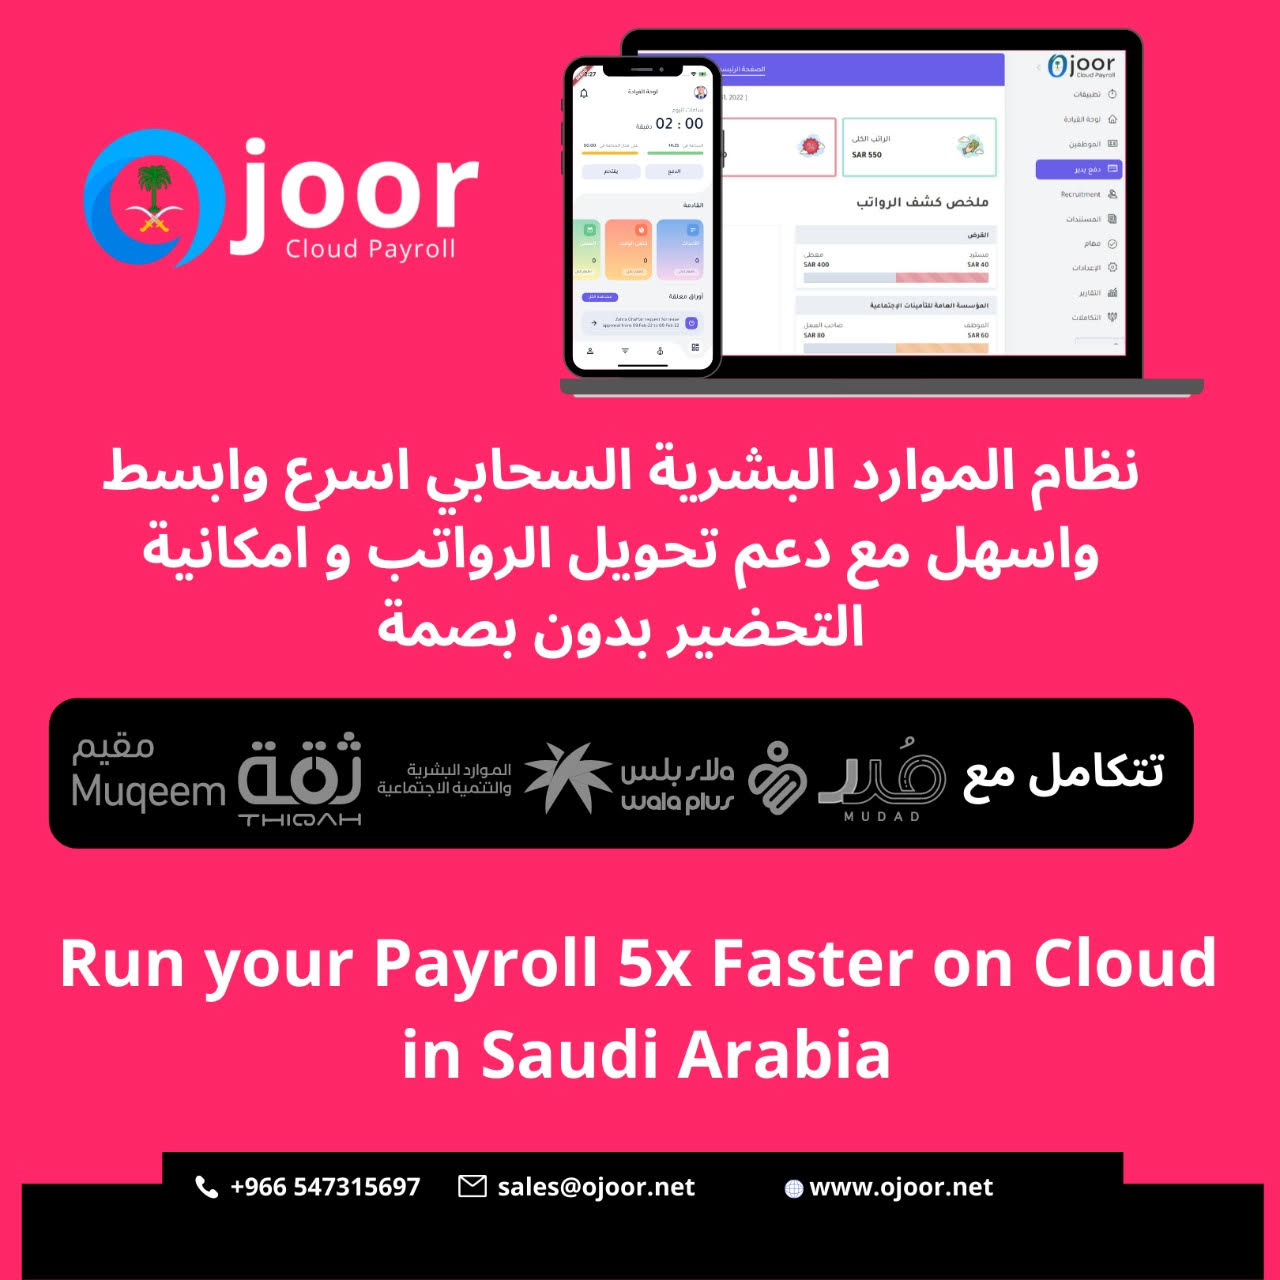 What are key features of Payroll Software in Saudi Arabia?